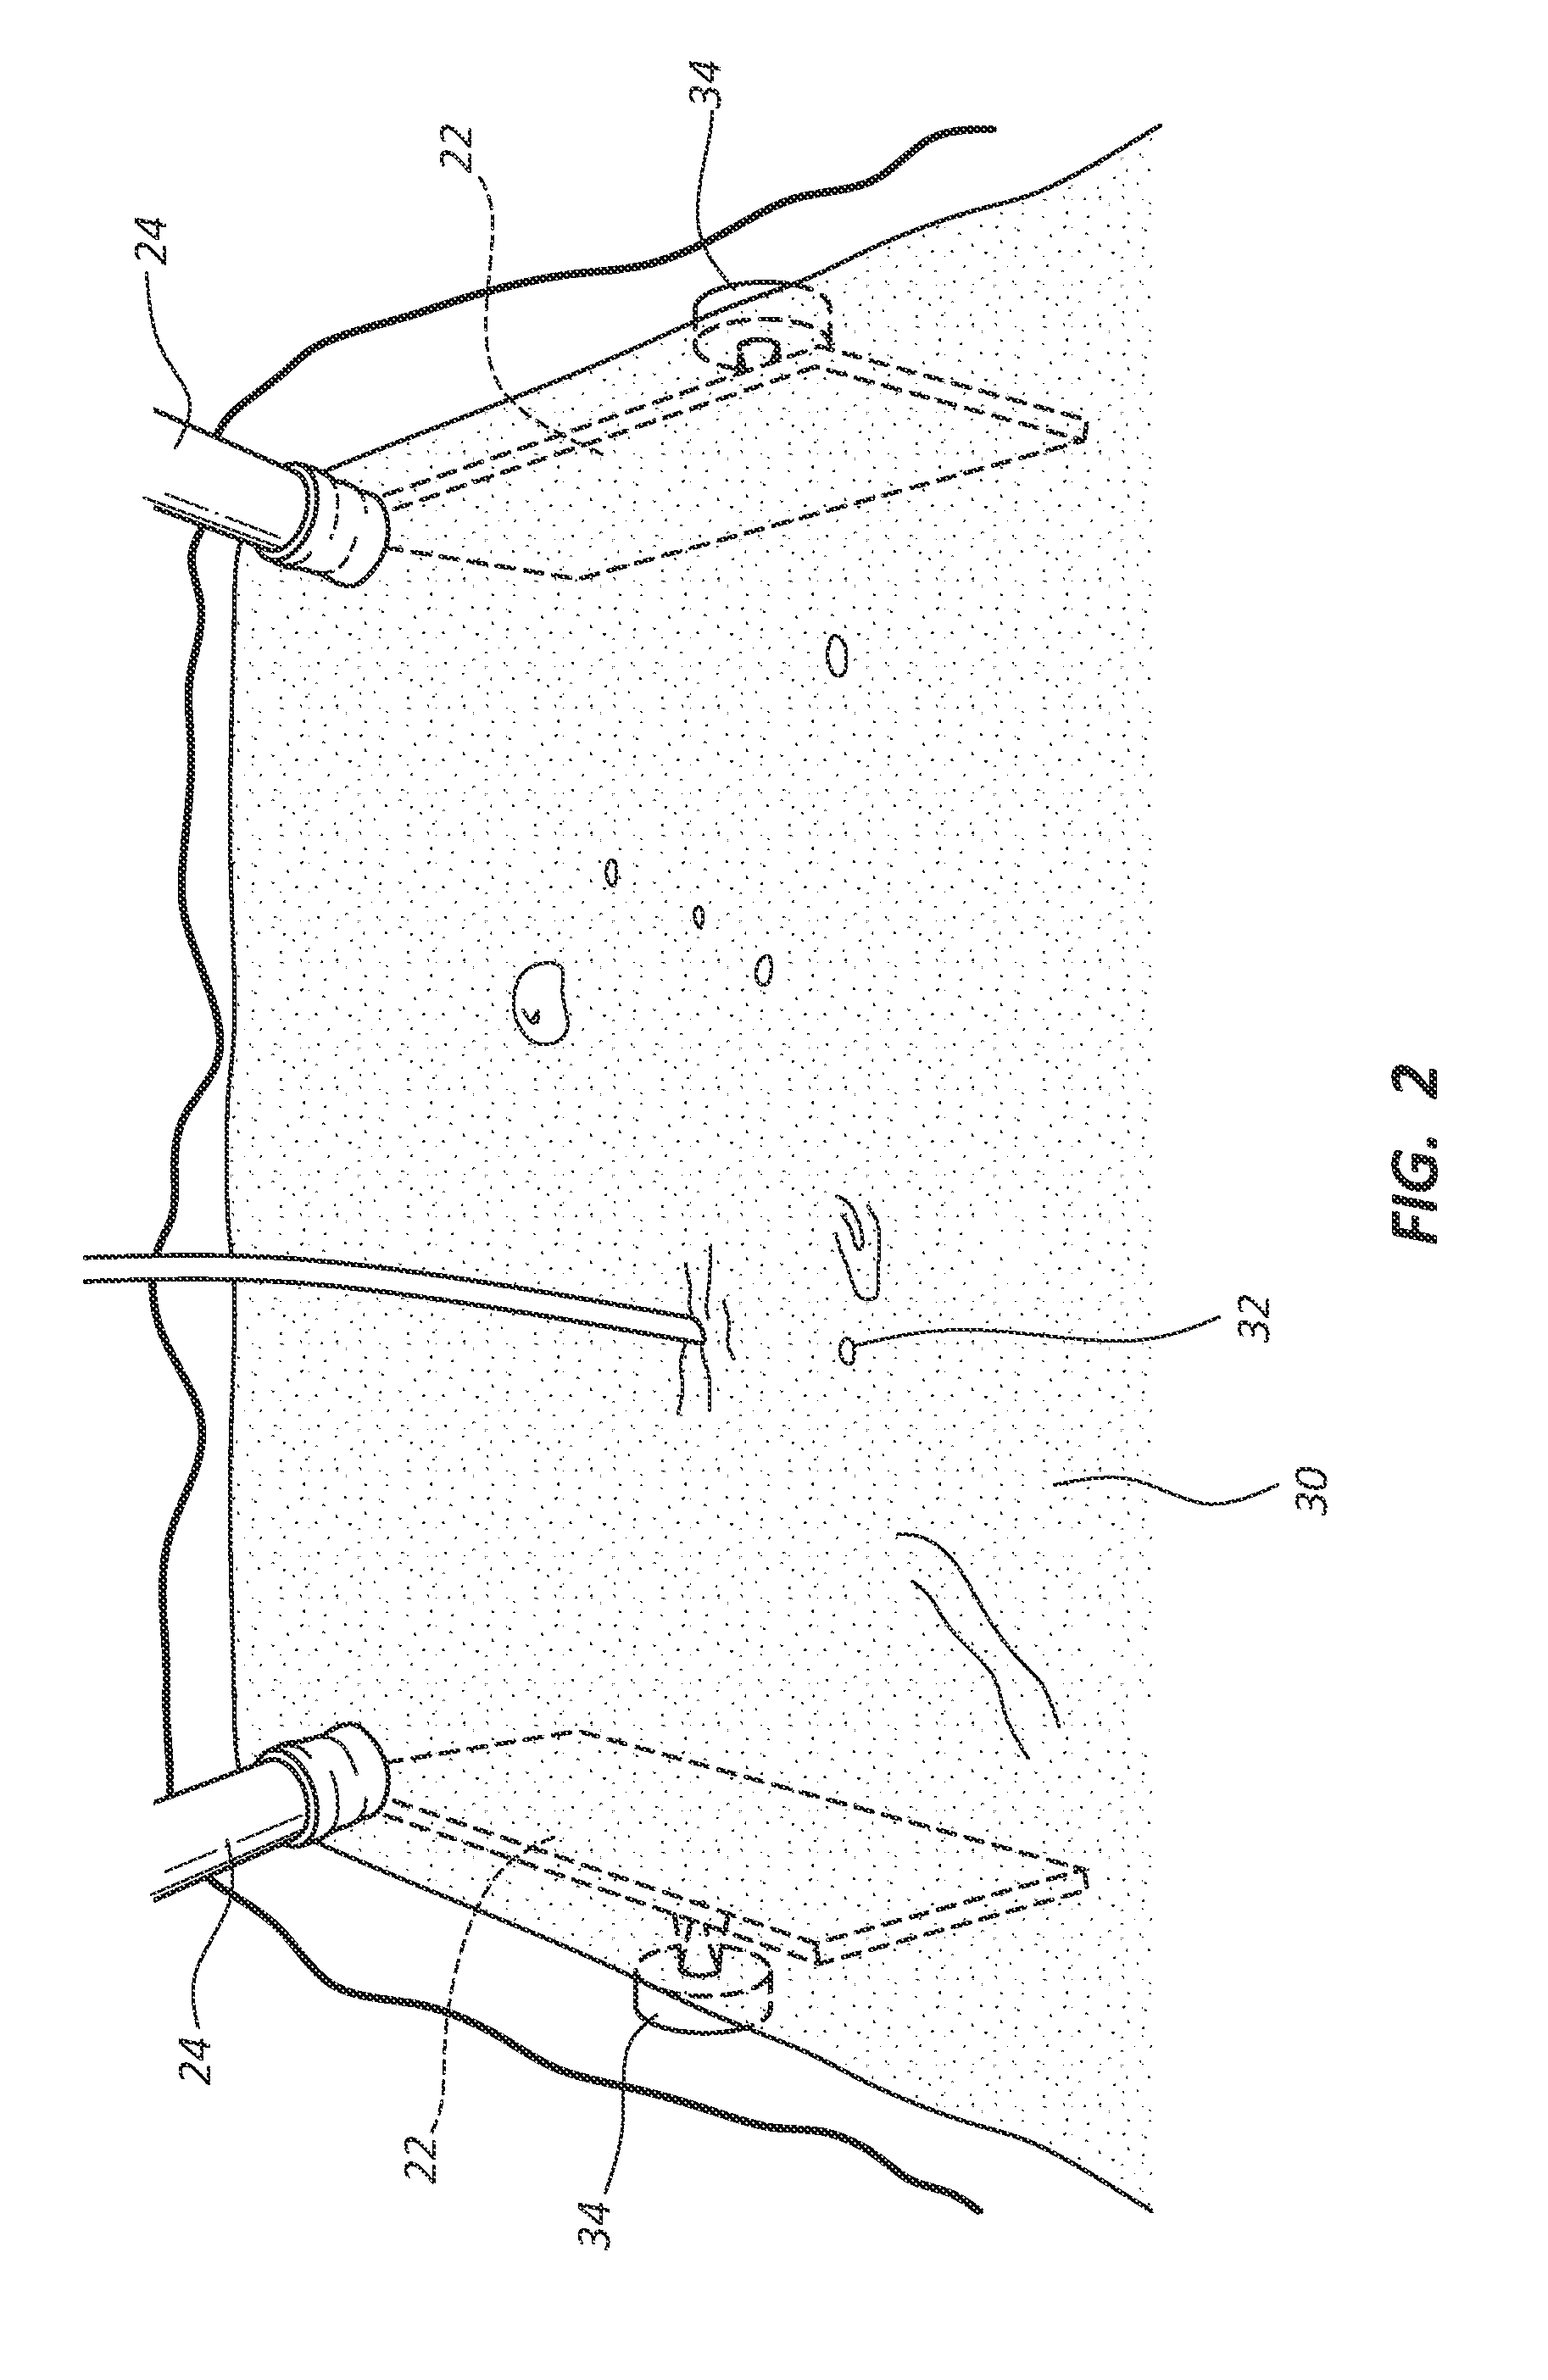 Systems and Methods for Increasing Growth of Biomass Feedstocks